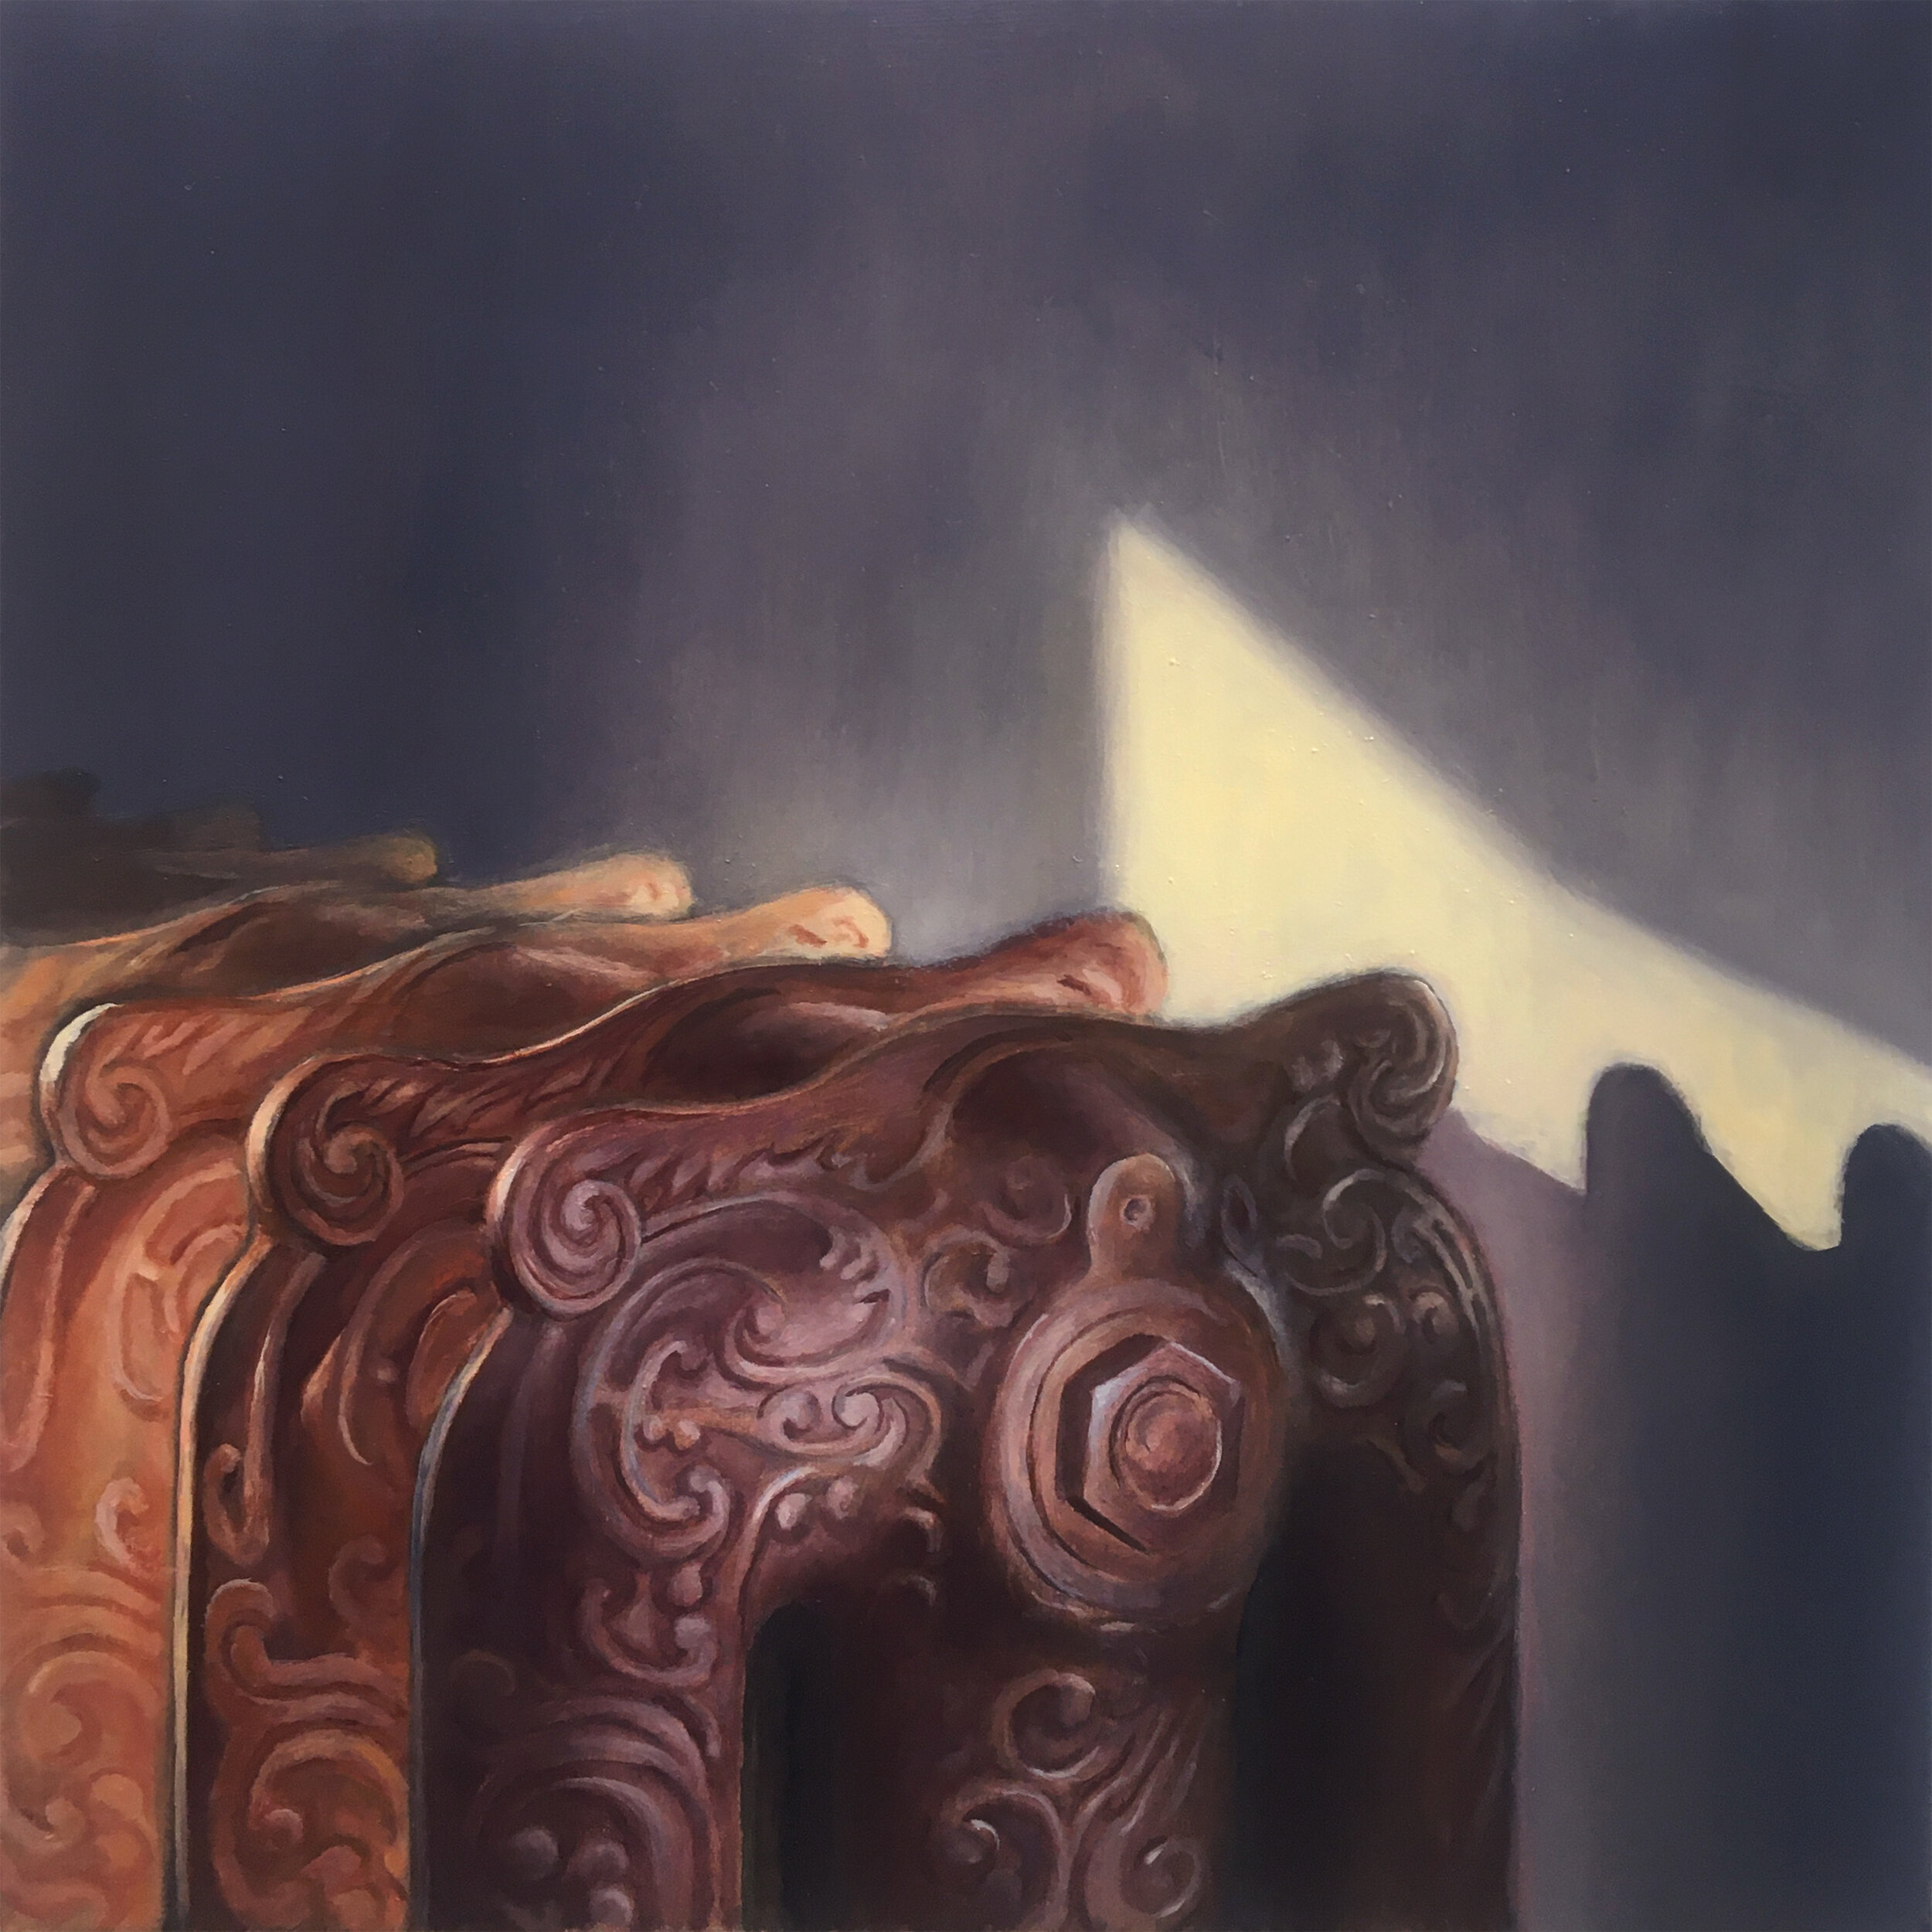   Radiator   2020  Oil on panel  10 x 10 inches       